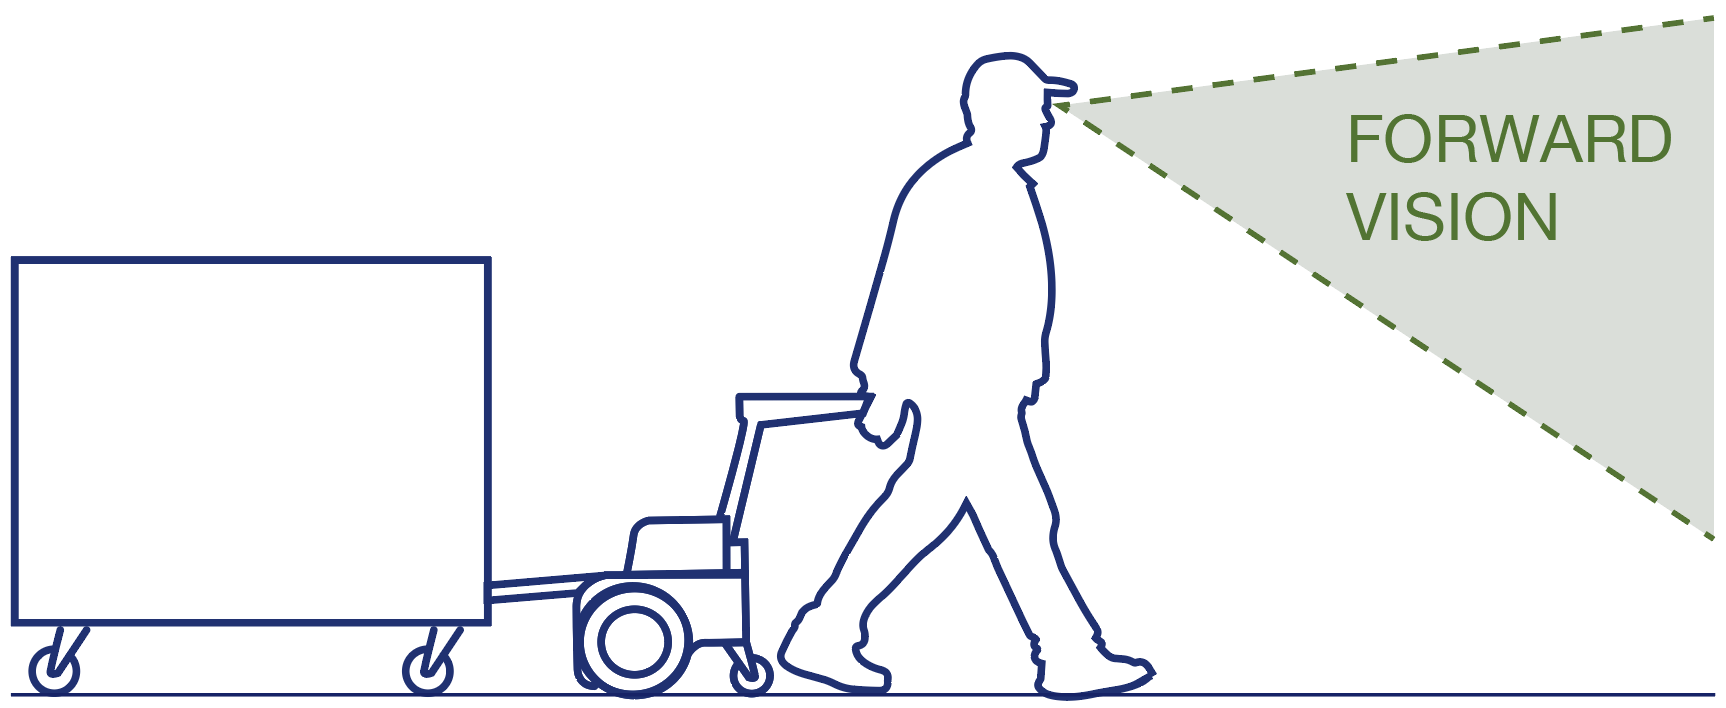 Maximise forward vision for safe towing